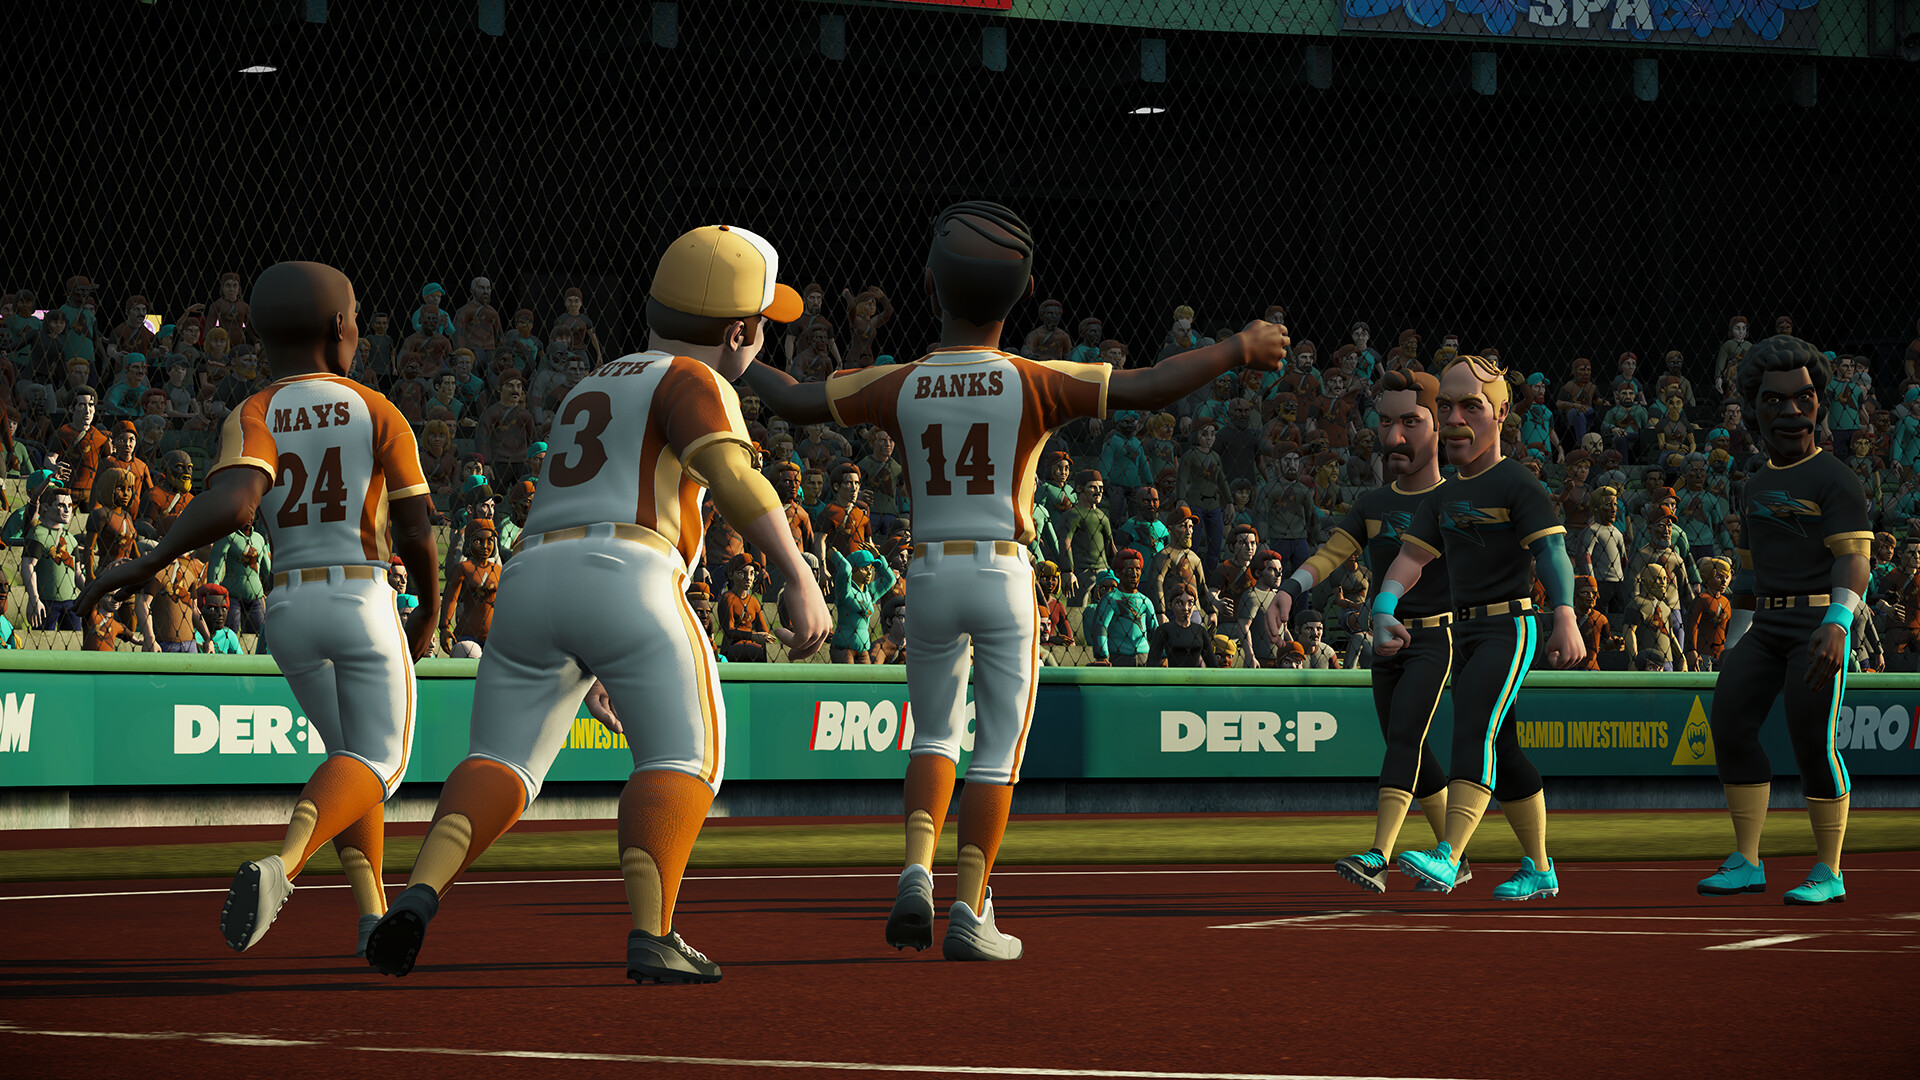 MLB the Show tips: Adding Custom Teams in Franchise 